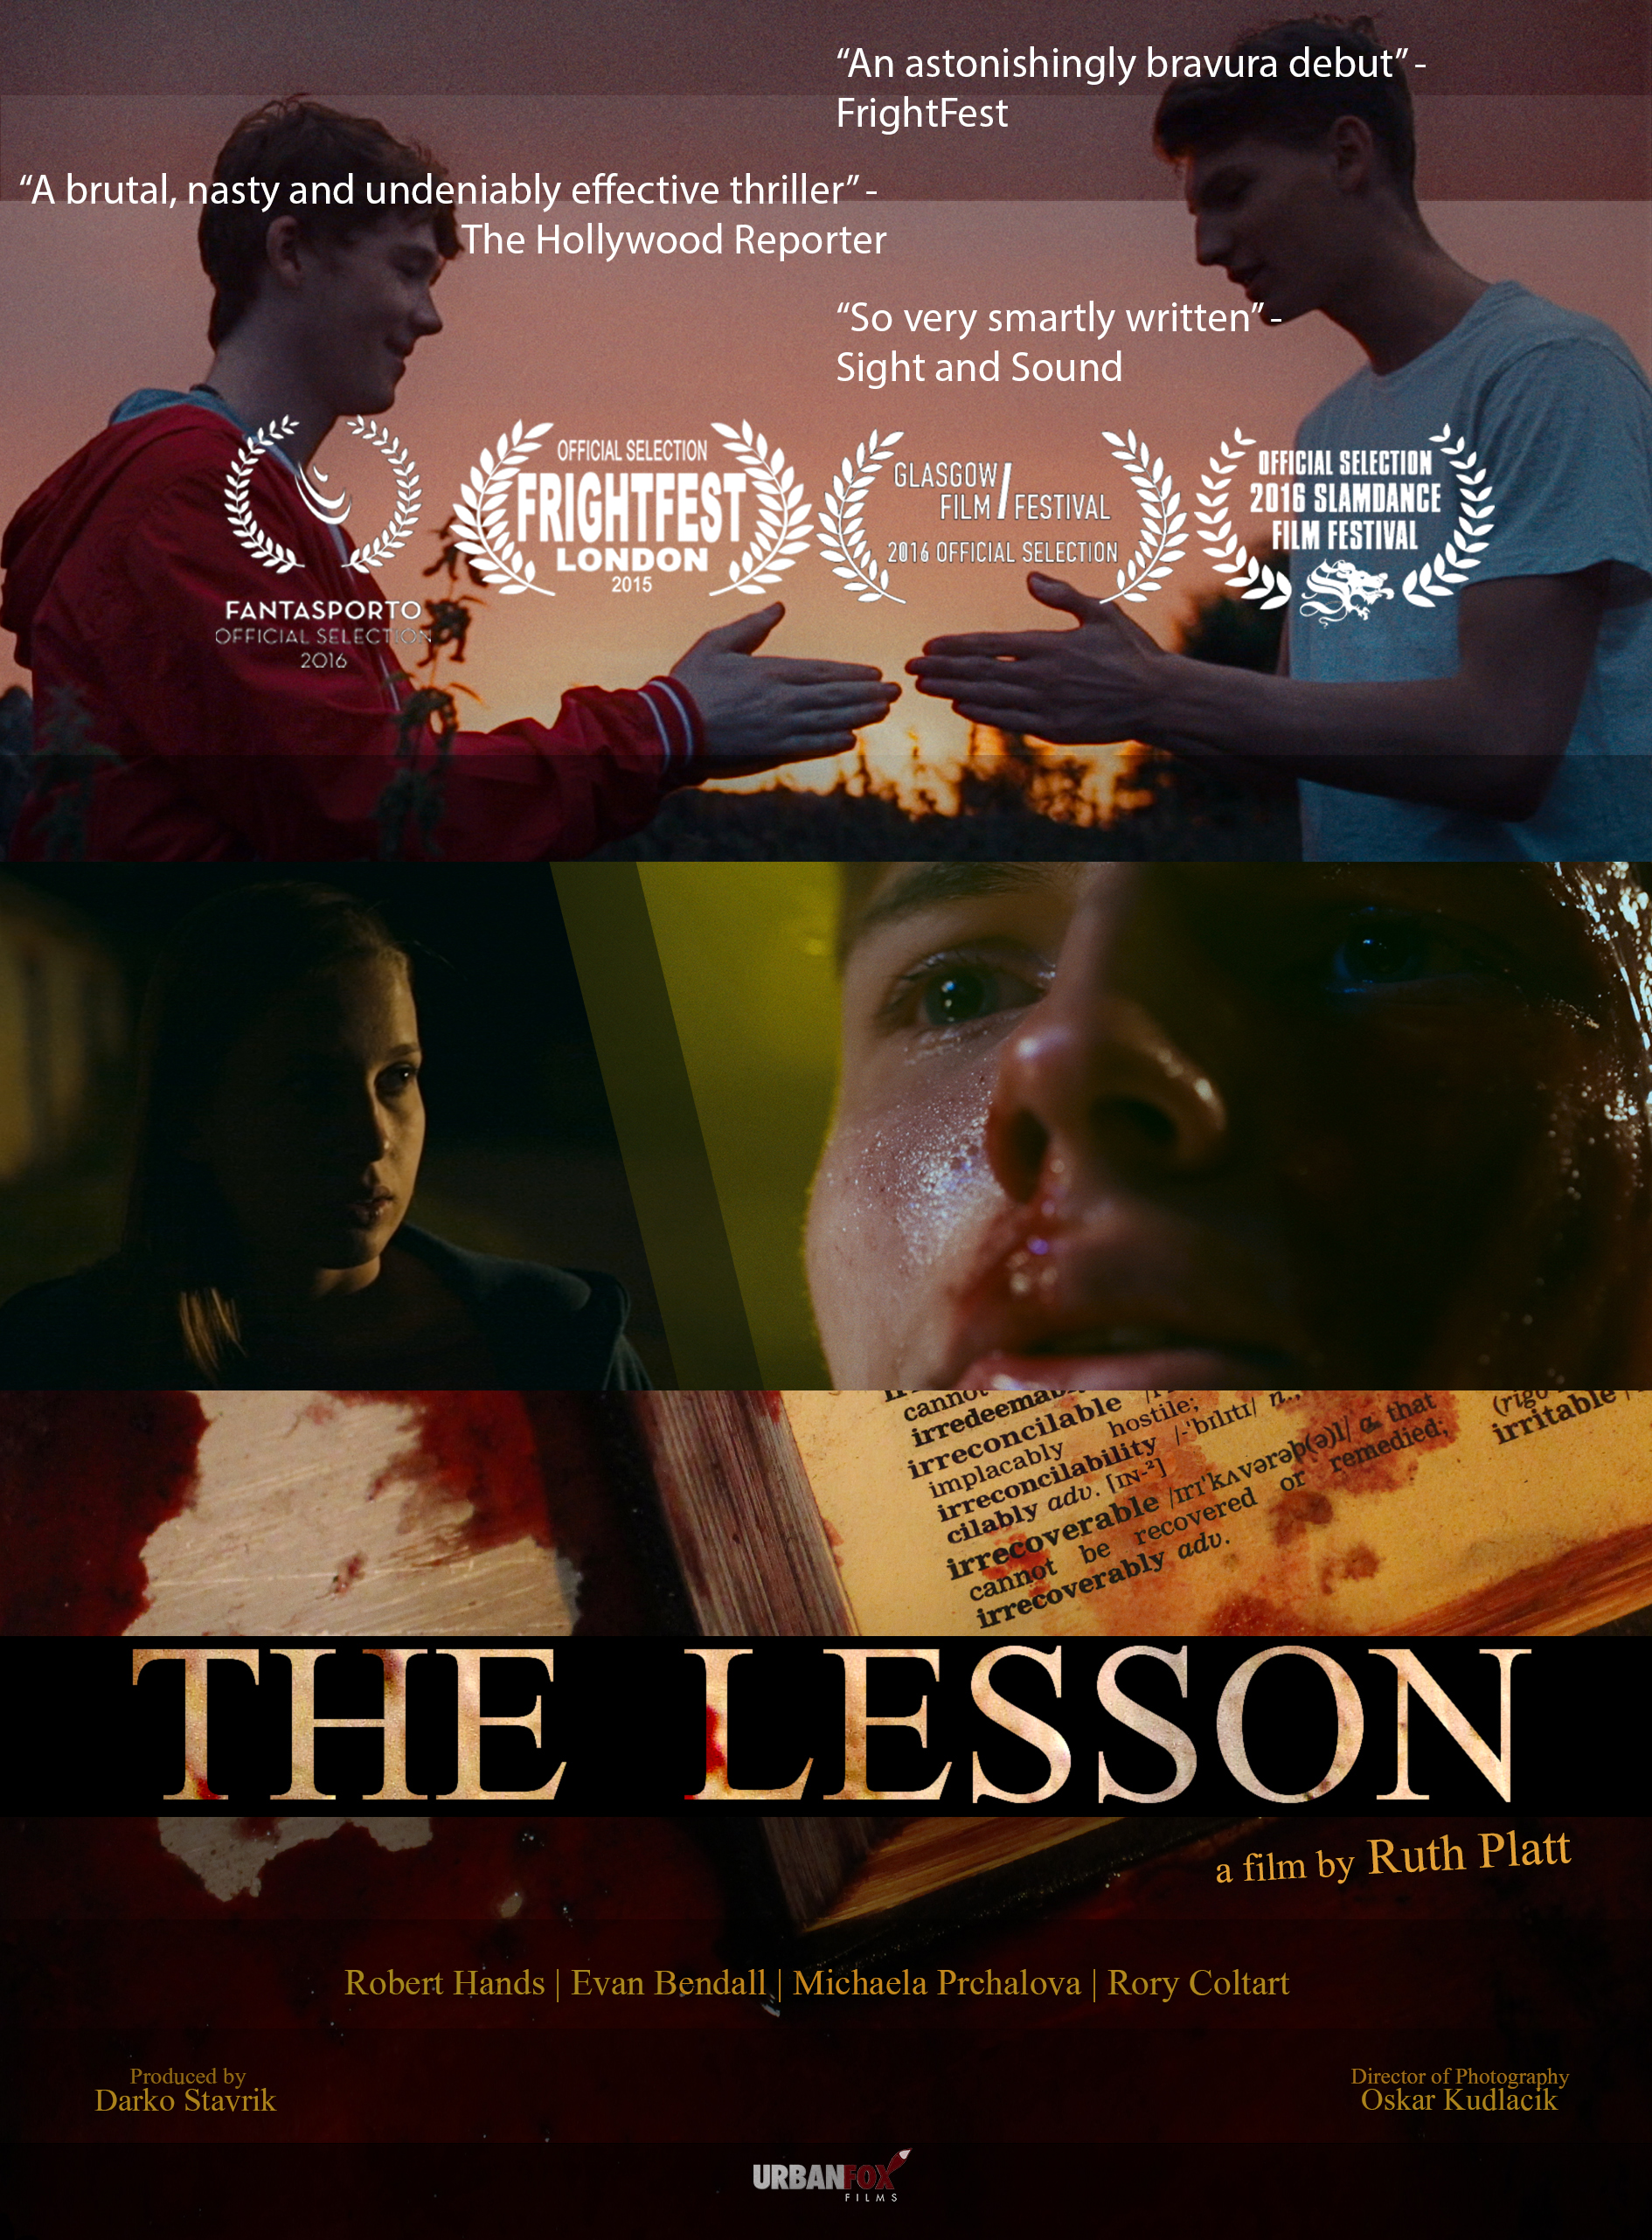 The Lesson New Poster-Final Laurels Quotes (1).jpg